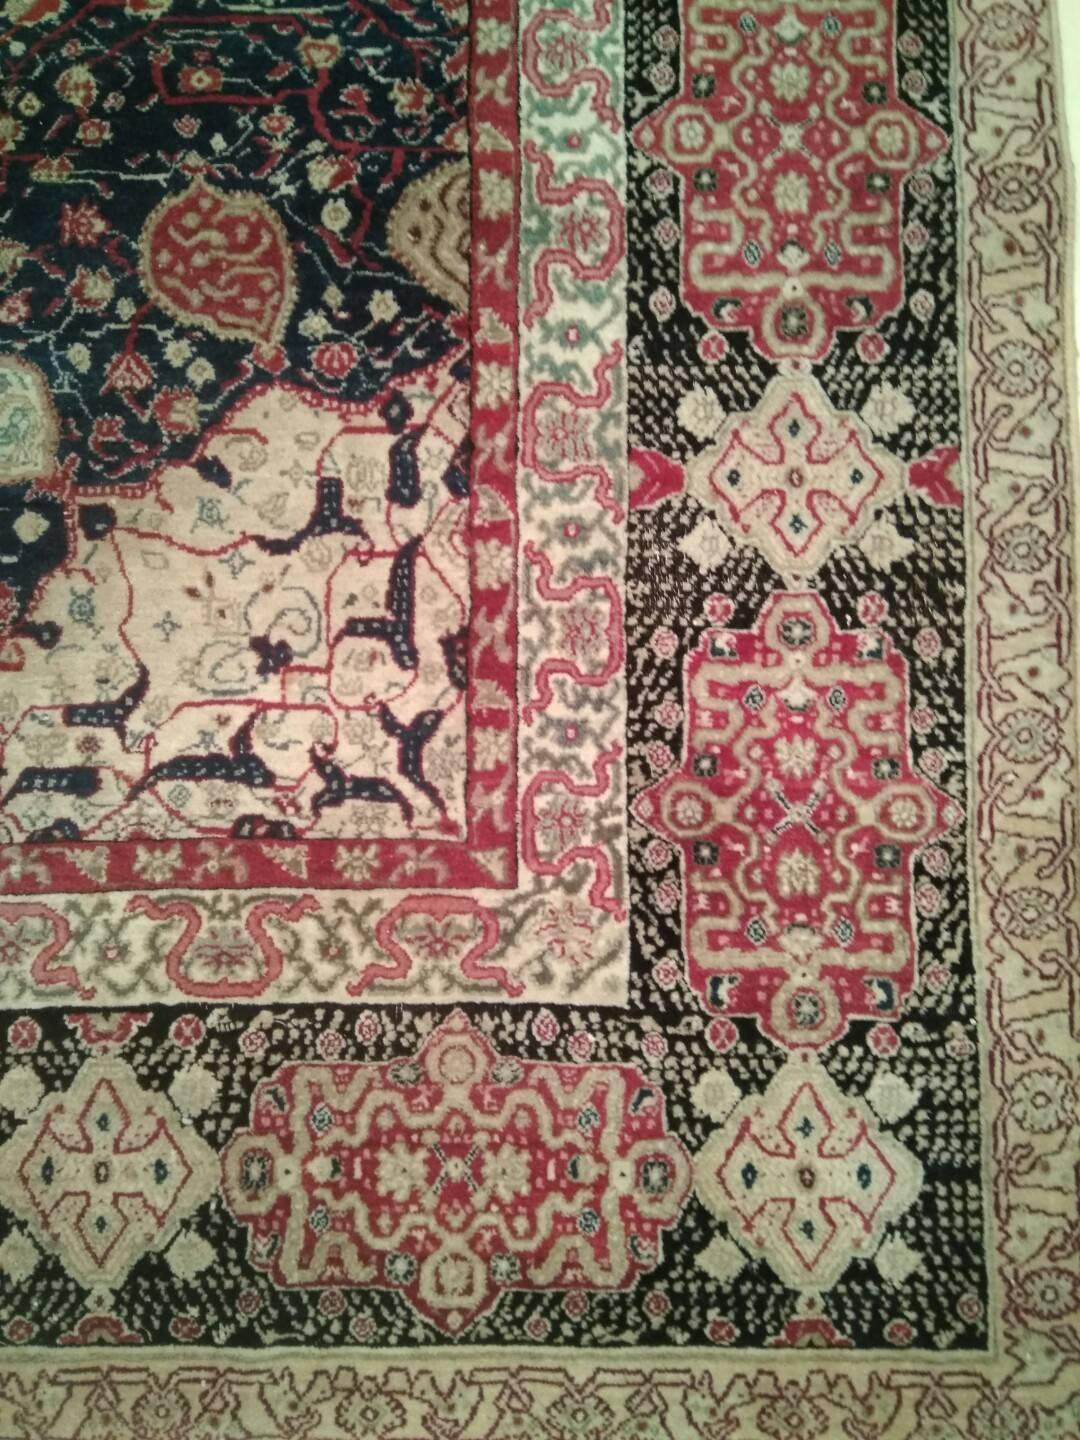 Very finely woven with lustrous wool, this elegant antique Indian Agra carpet is distinguished by a centralised pattern originating from a very rare 16th century Persian Safavid rug known as the Ardabil carpet, originally woven as a pair and now